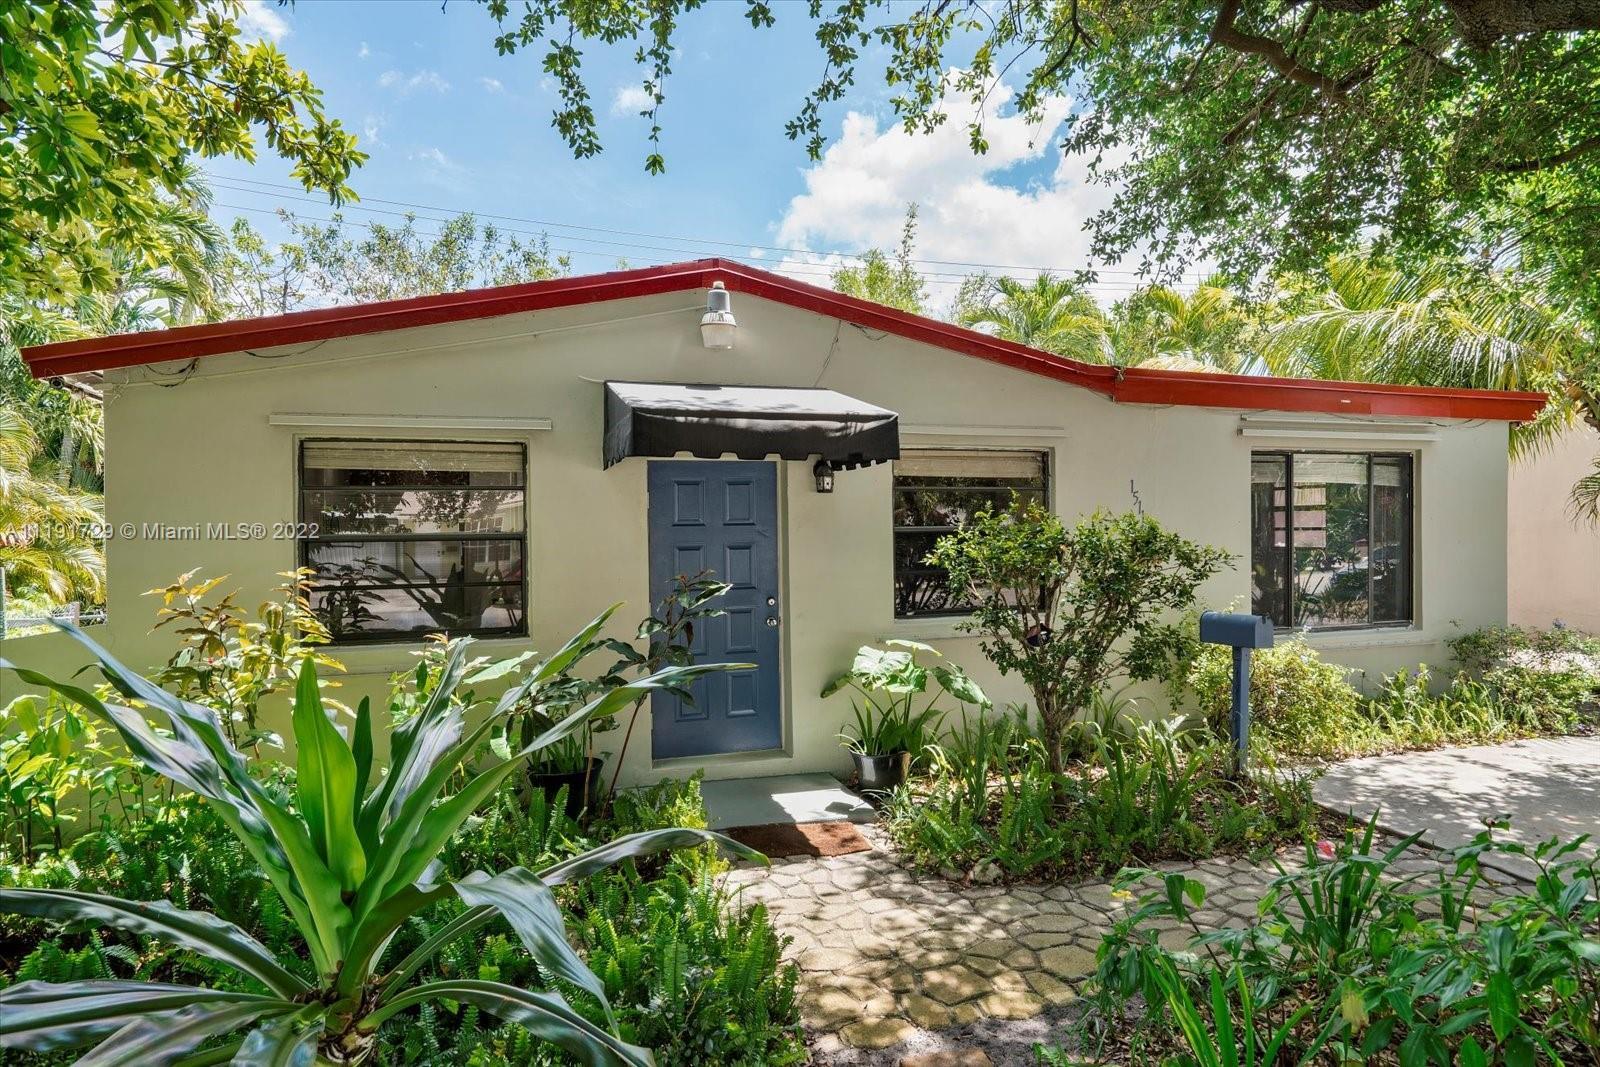 Your Garden Oasis Awaits! This 4 bedroom 2 bathroom home in Hollywood is move-in ready.  The home is